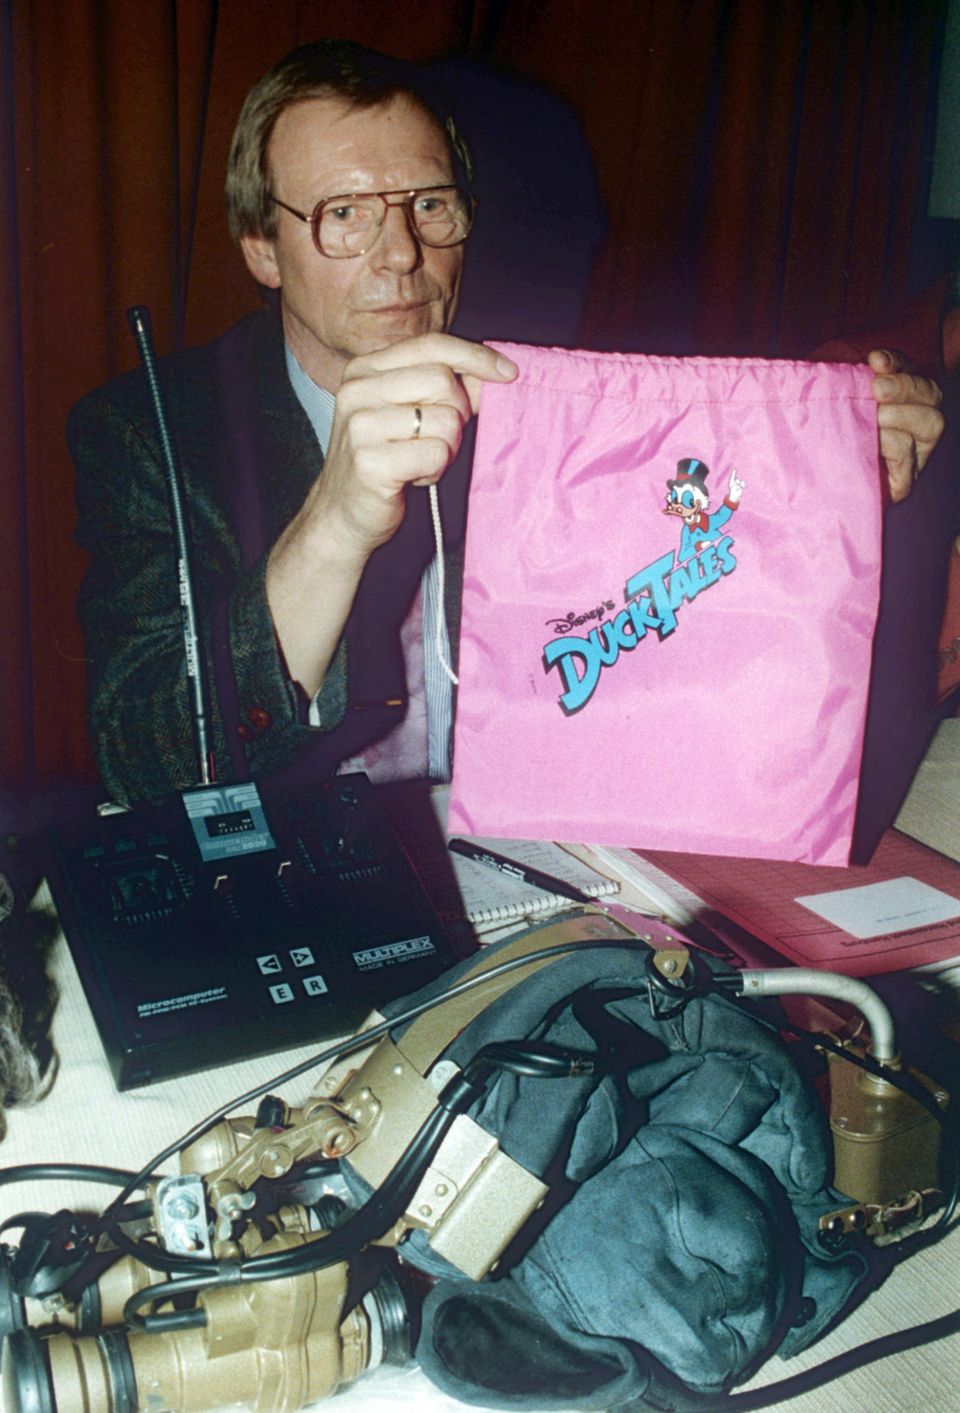 Detective Inspector Arthur Heins shows a pink bag with a Duck Tales print on it as evidence